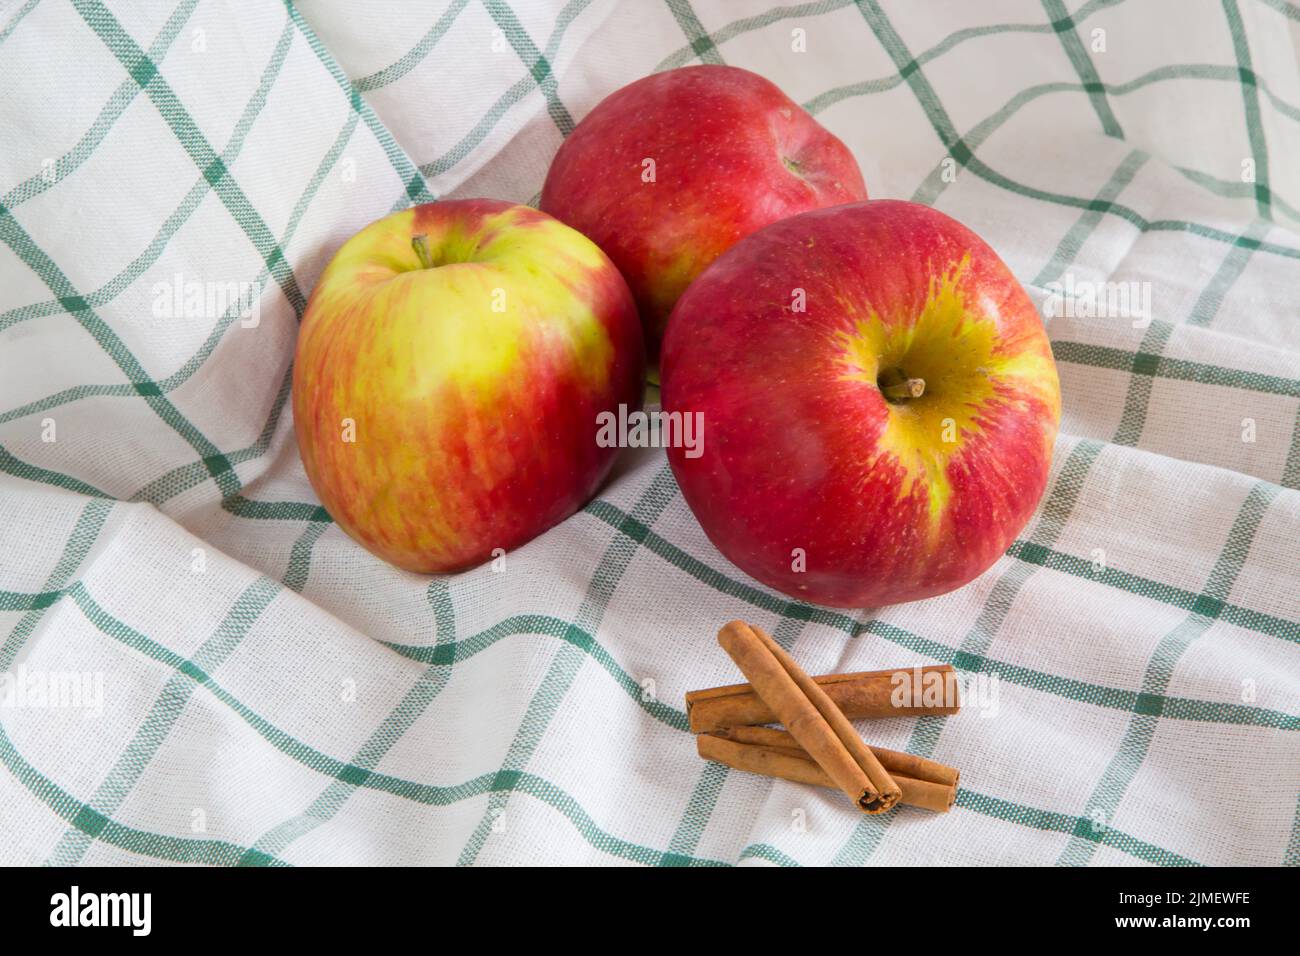 Vibrant color still life with three ripe red apples and cinnamon sticks on the cloth Stock Photo